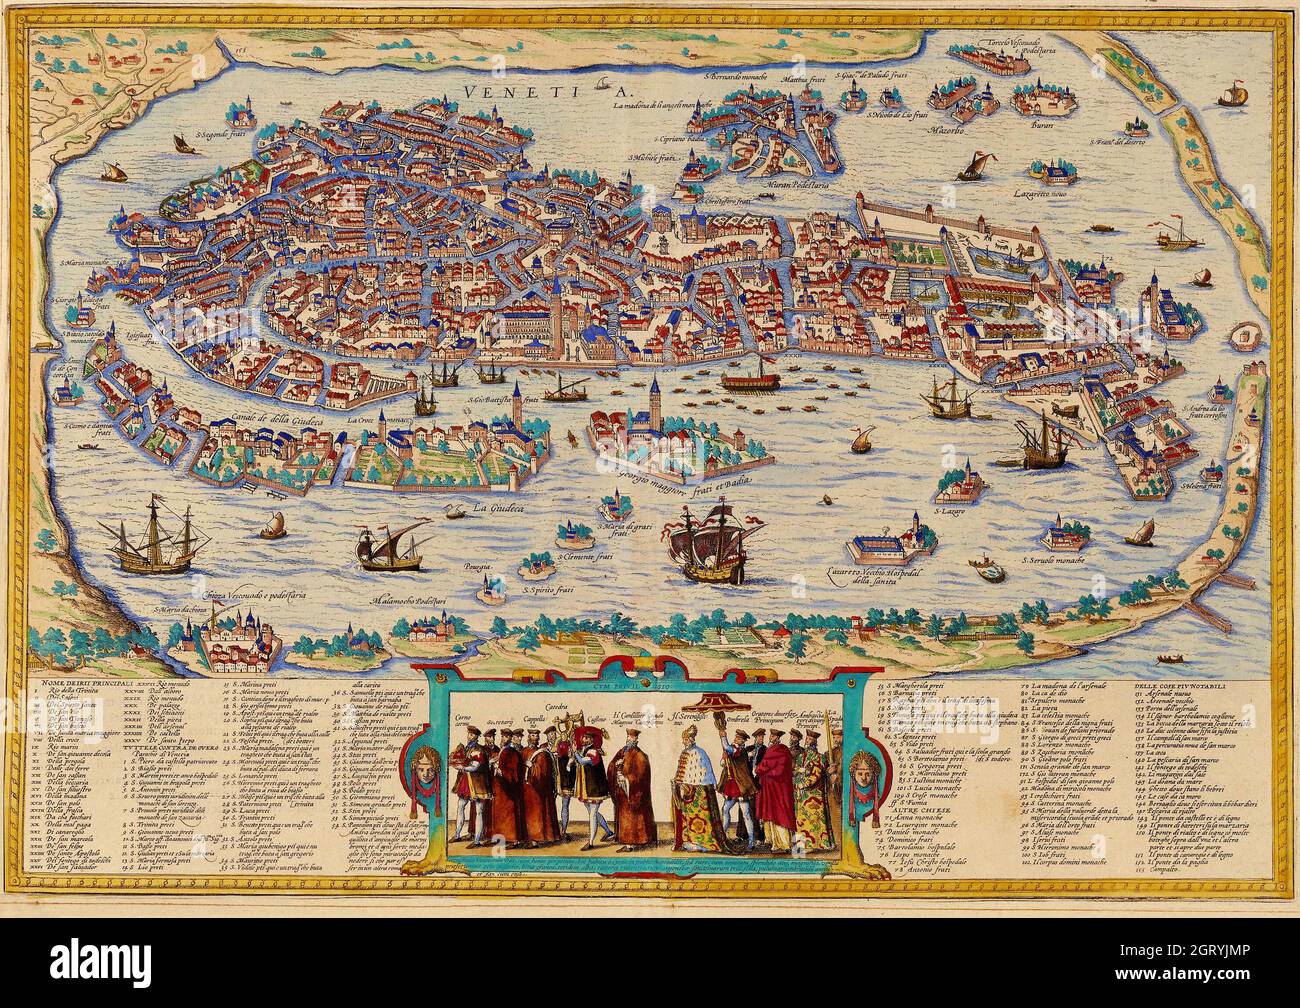 Map of Venice, 1572 by Braun and Hogenberg. Engraving by Bolognino Zaltieri, 1565. Stock Photo